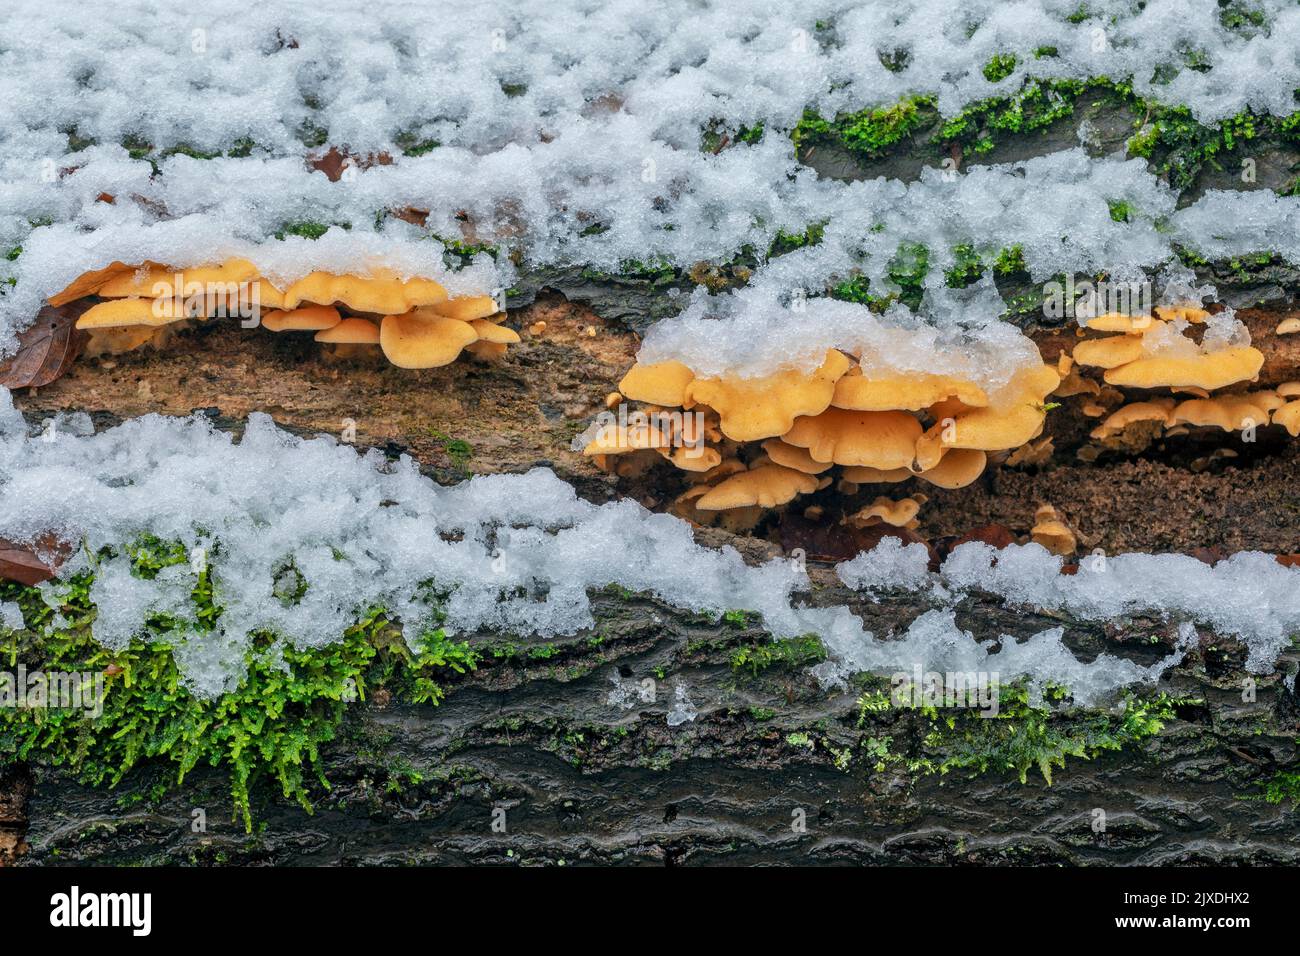 Orange Oyster, Mock Oyster (Phyllotopsis nidulans) on the trunk of a decaying Common Beech in winter. Germany Stock Photo